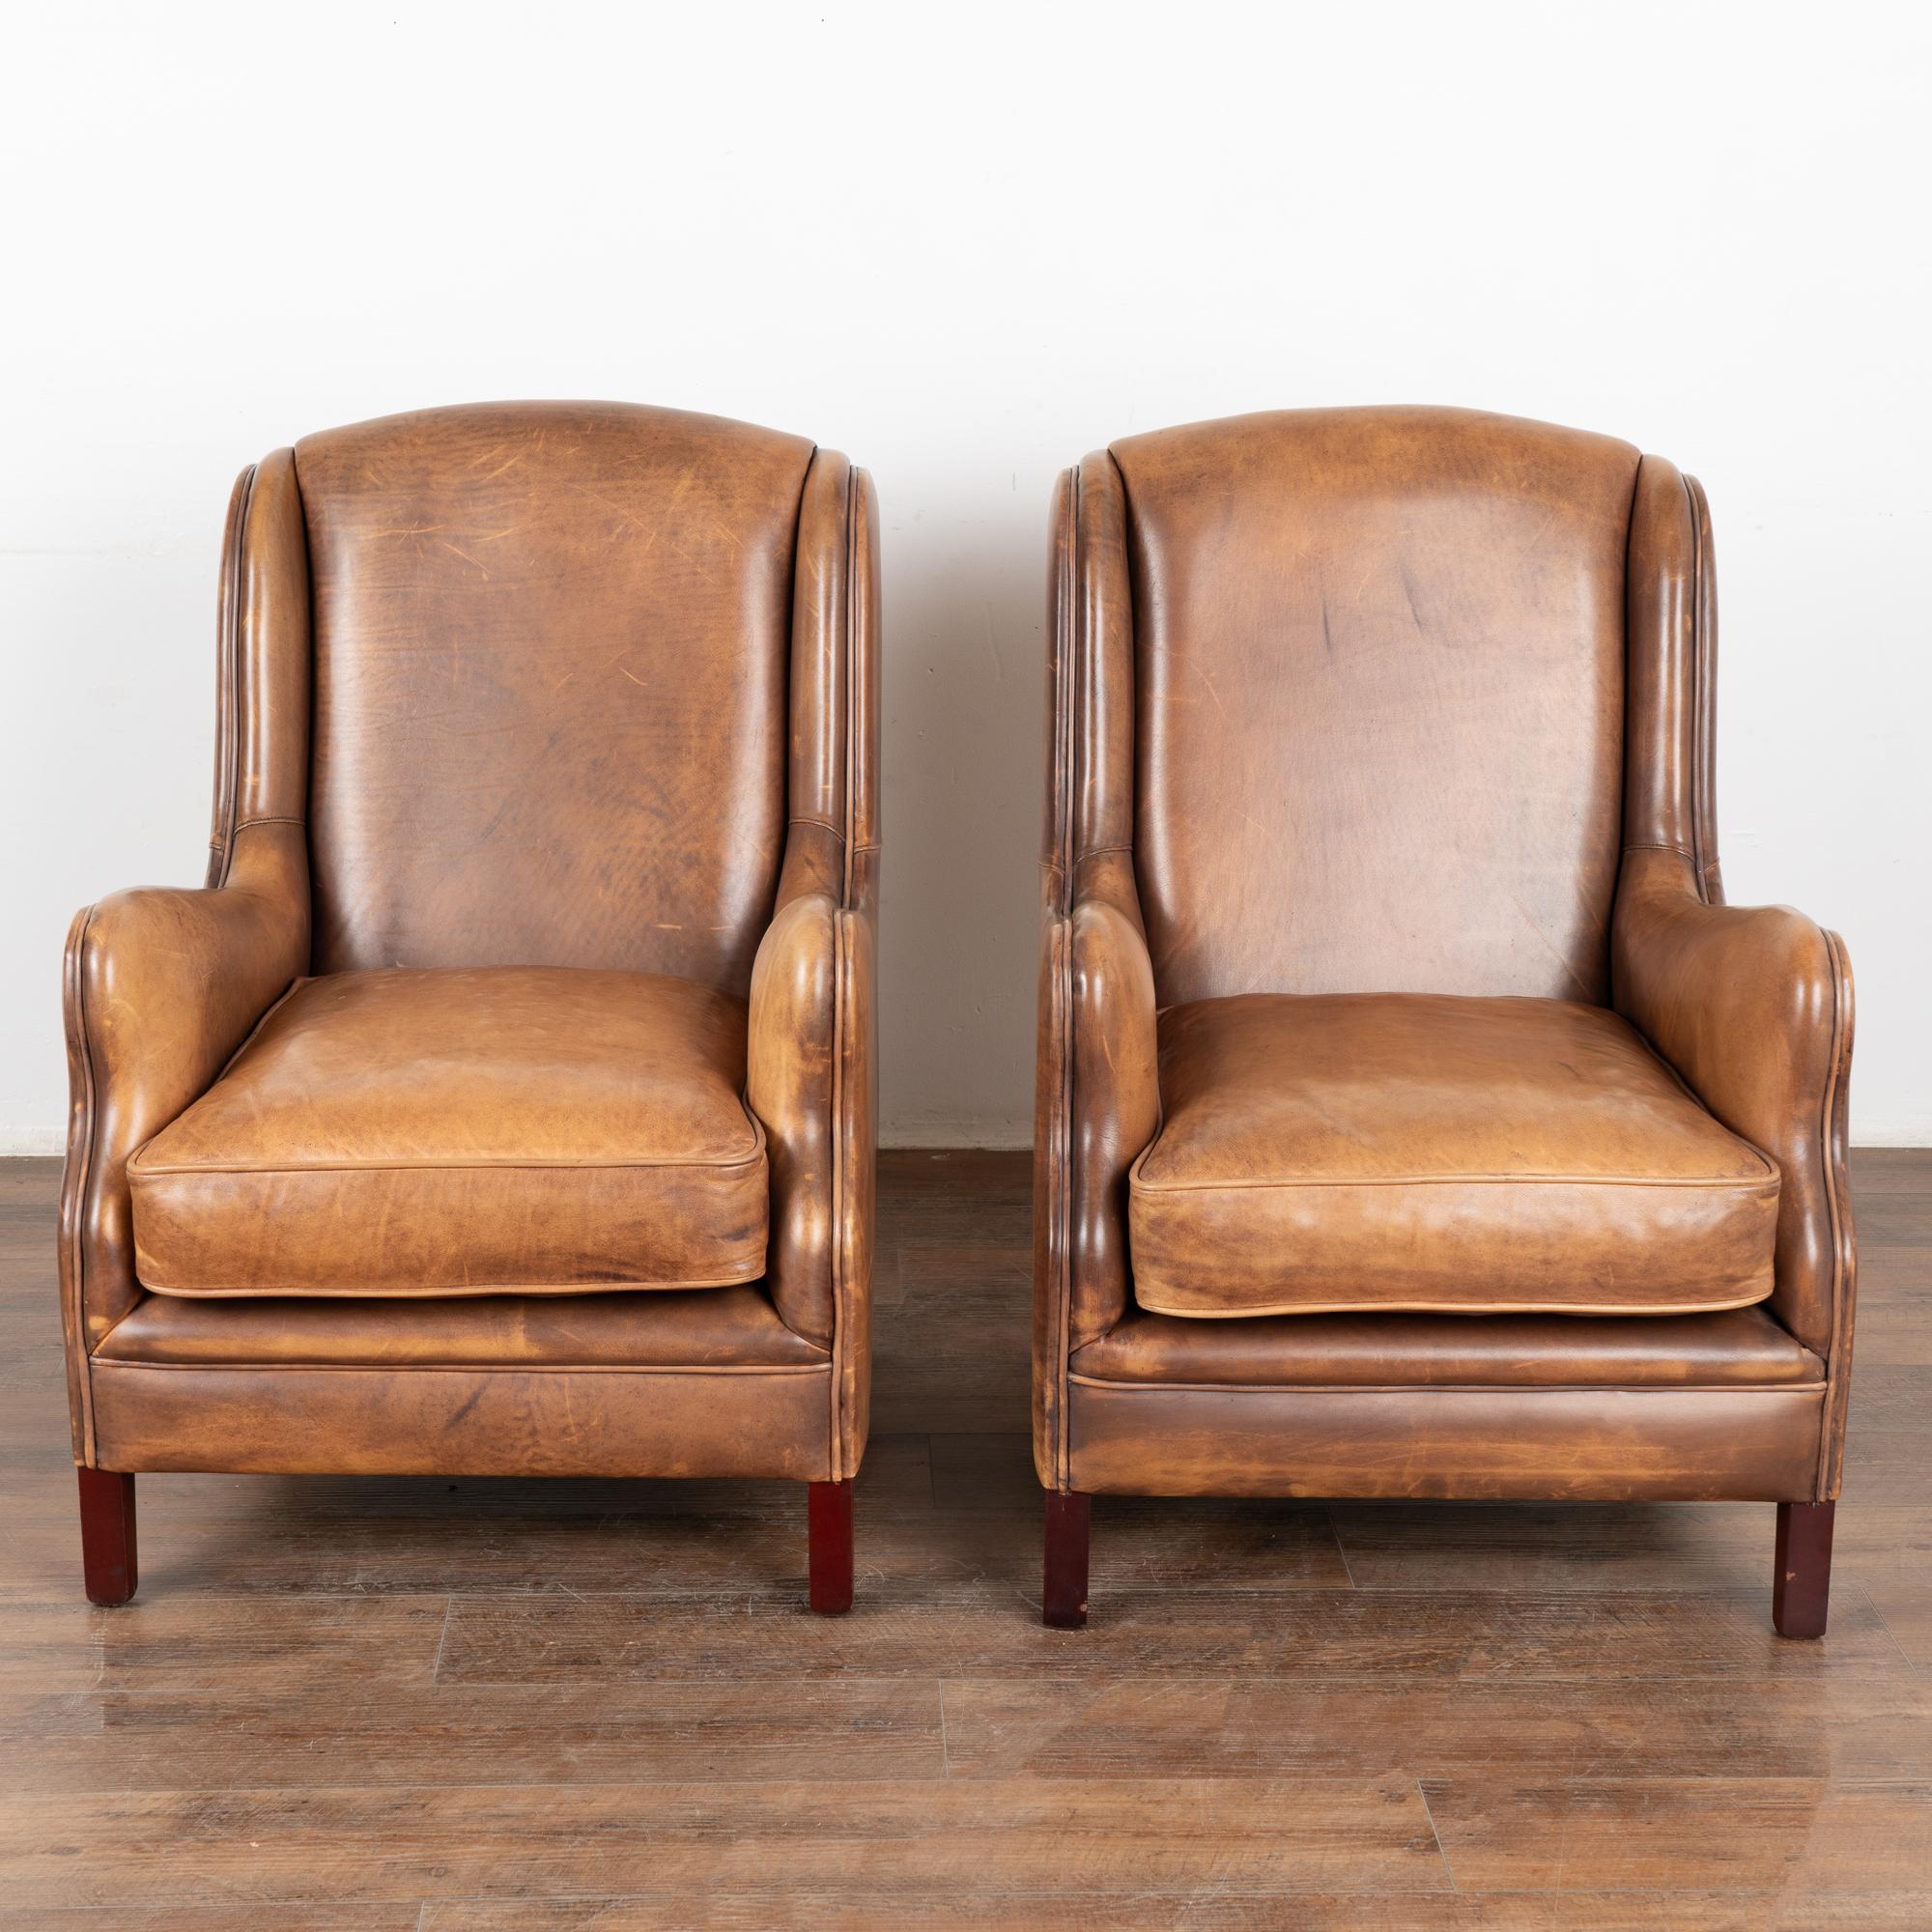 Art Deco Pair, Vintage Brown Leather Wingback Arm Chairs From France, circa 1920-40